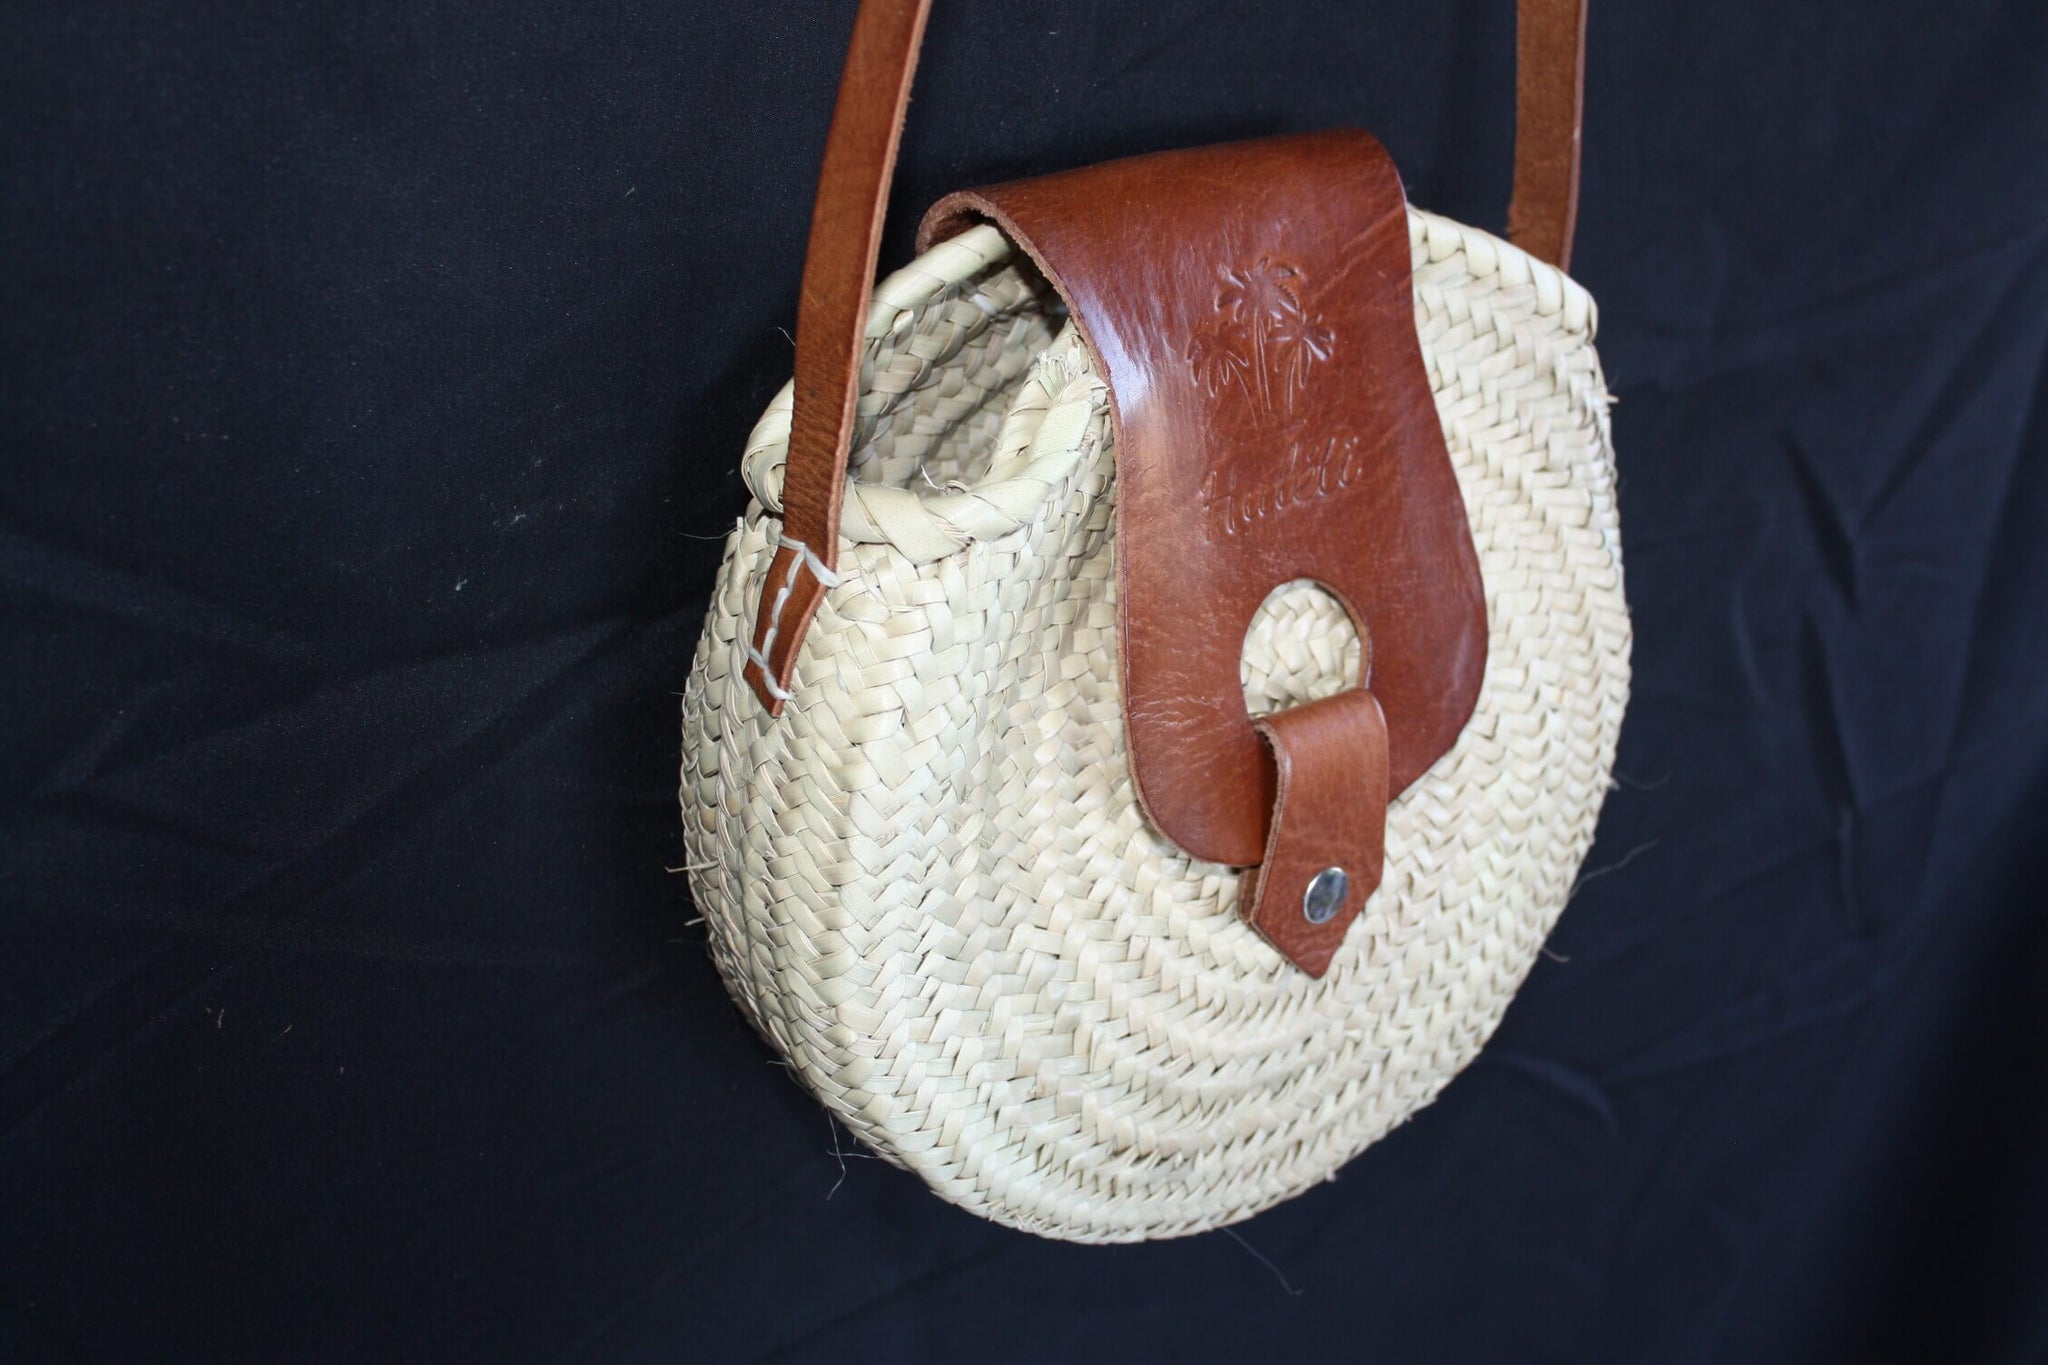 SUPERB Palm Tree Round Bag with Shoulder Strap - Leather or Suede - HANDMADE - Moroccan craftsmanship - summer woman